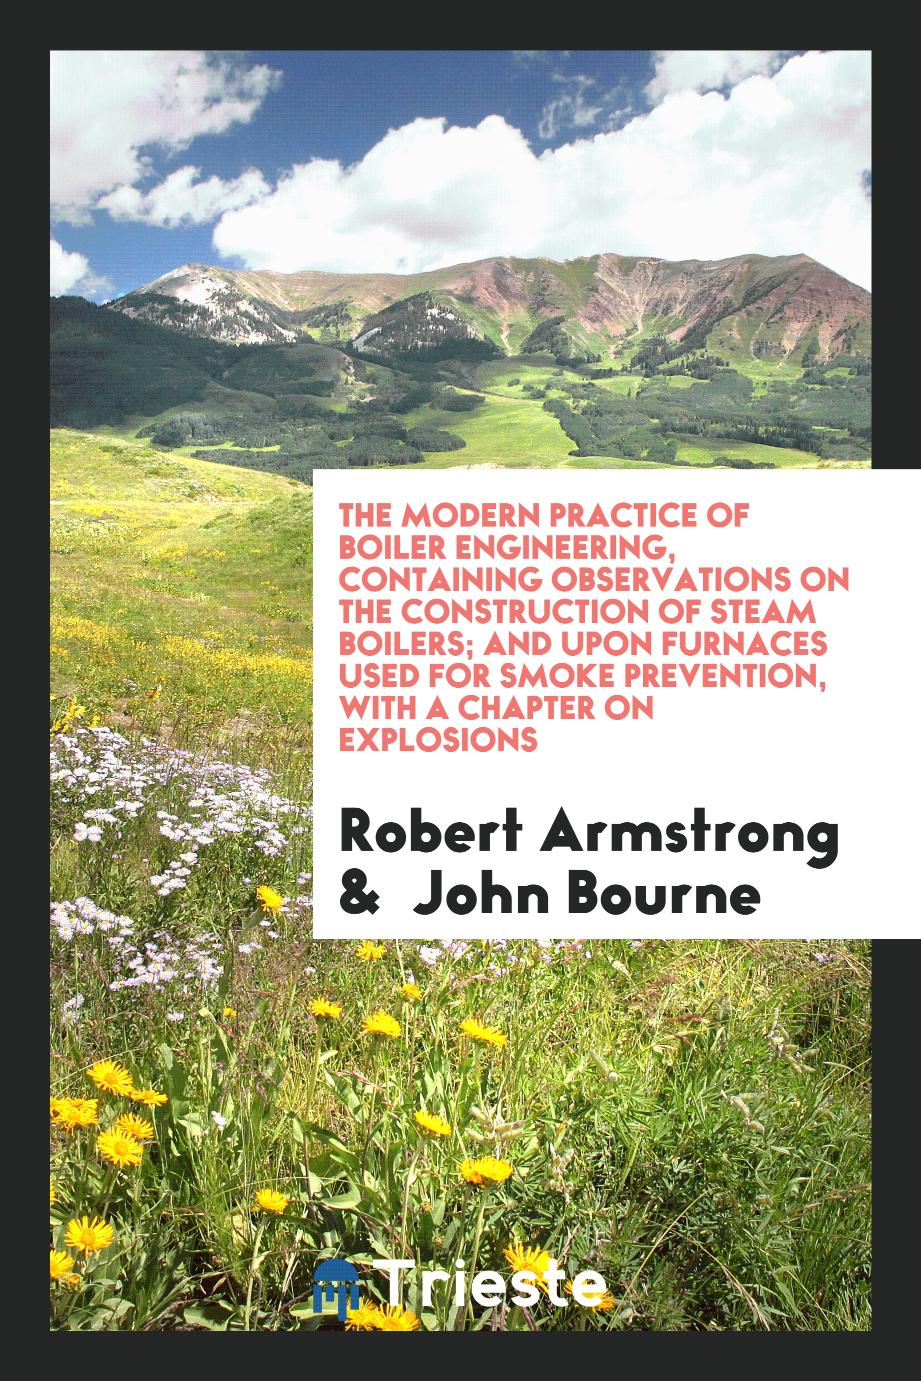 The Modern Practice of Boiler Engineering, Containing Observations on the Construction of Steam Boilers; And upon Furnaces Used for Smoke Prevention, with a Chapter on Explosions